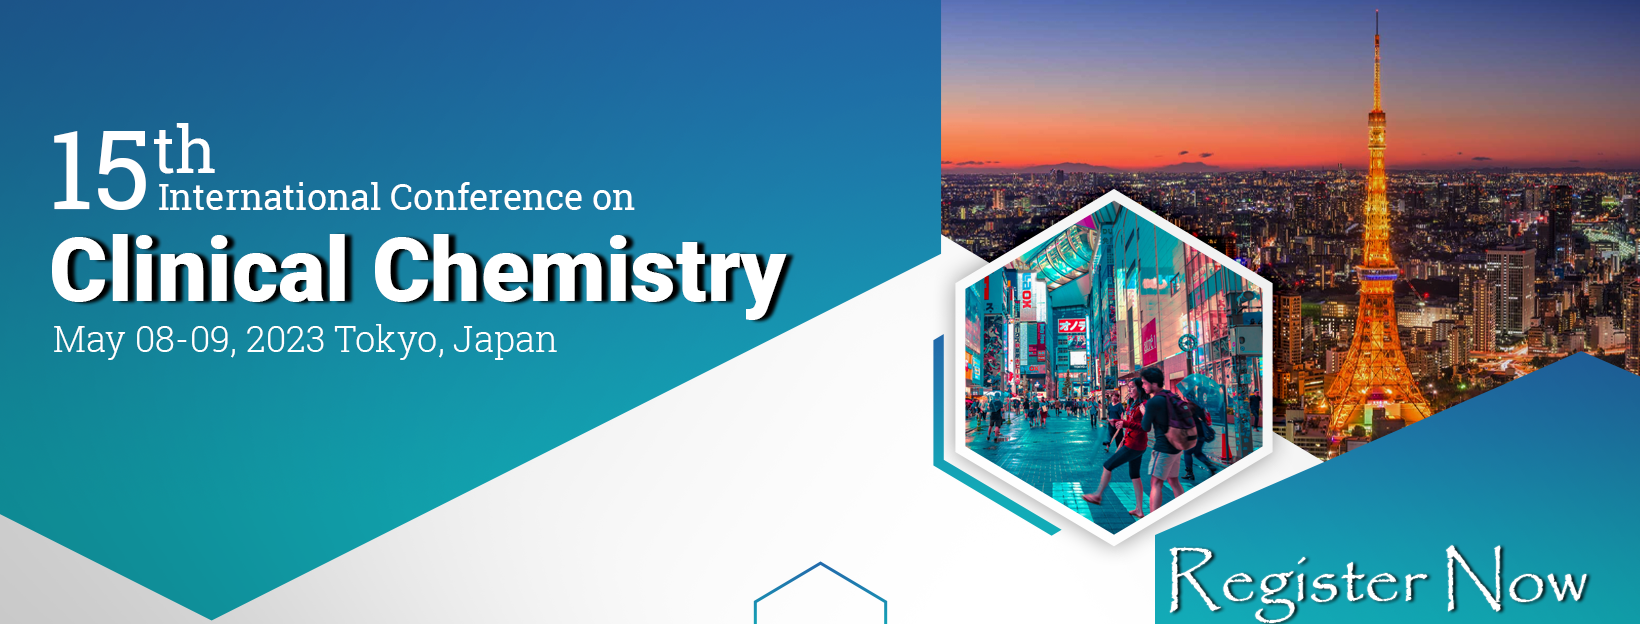 Clinical Chemistry Conference 2023, Tokyo, Japan